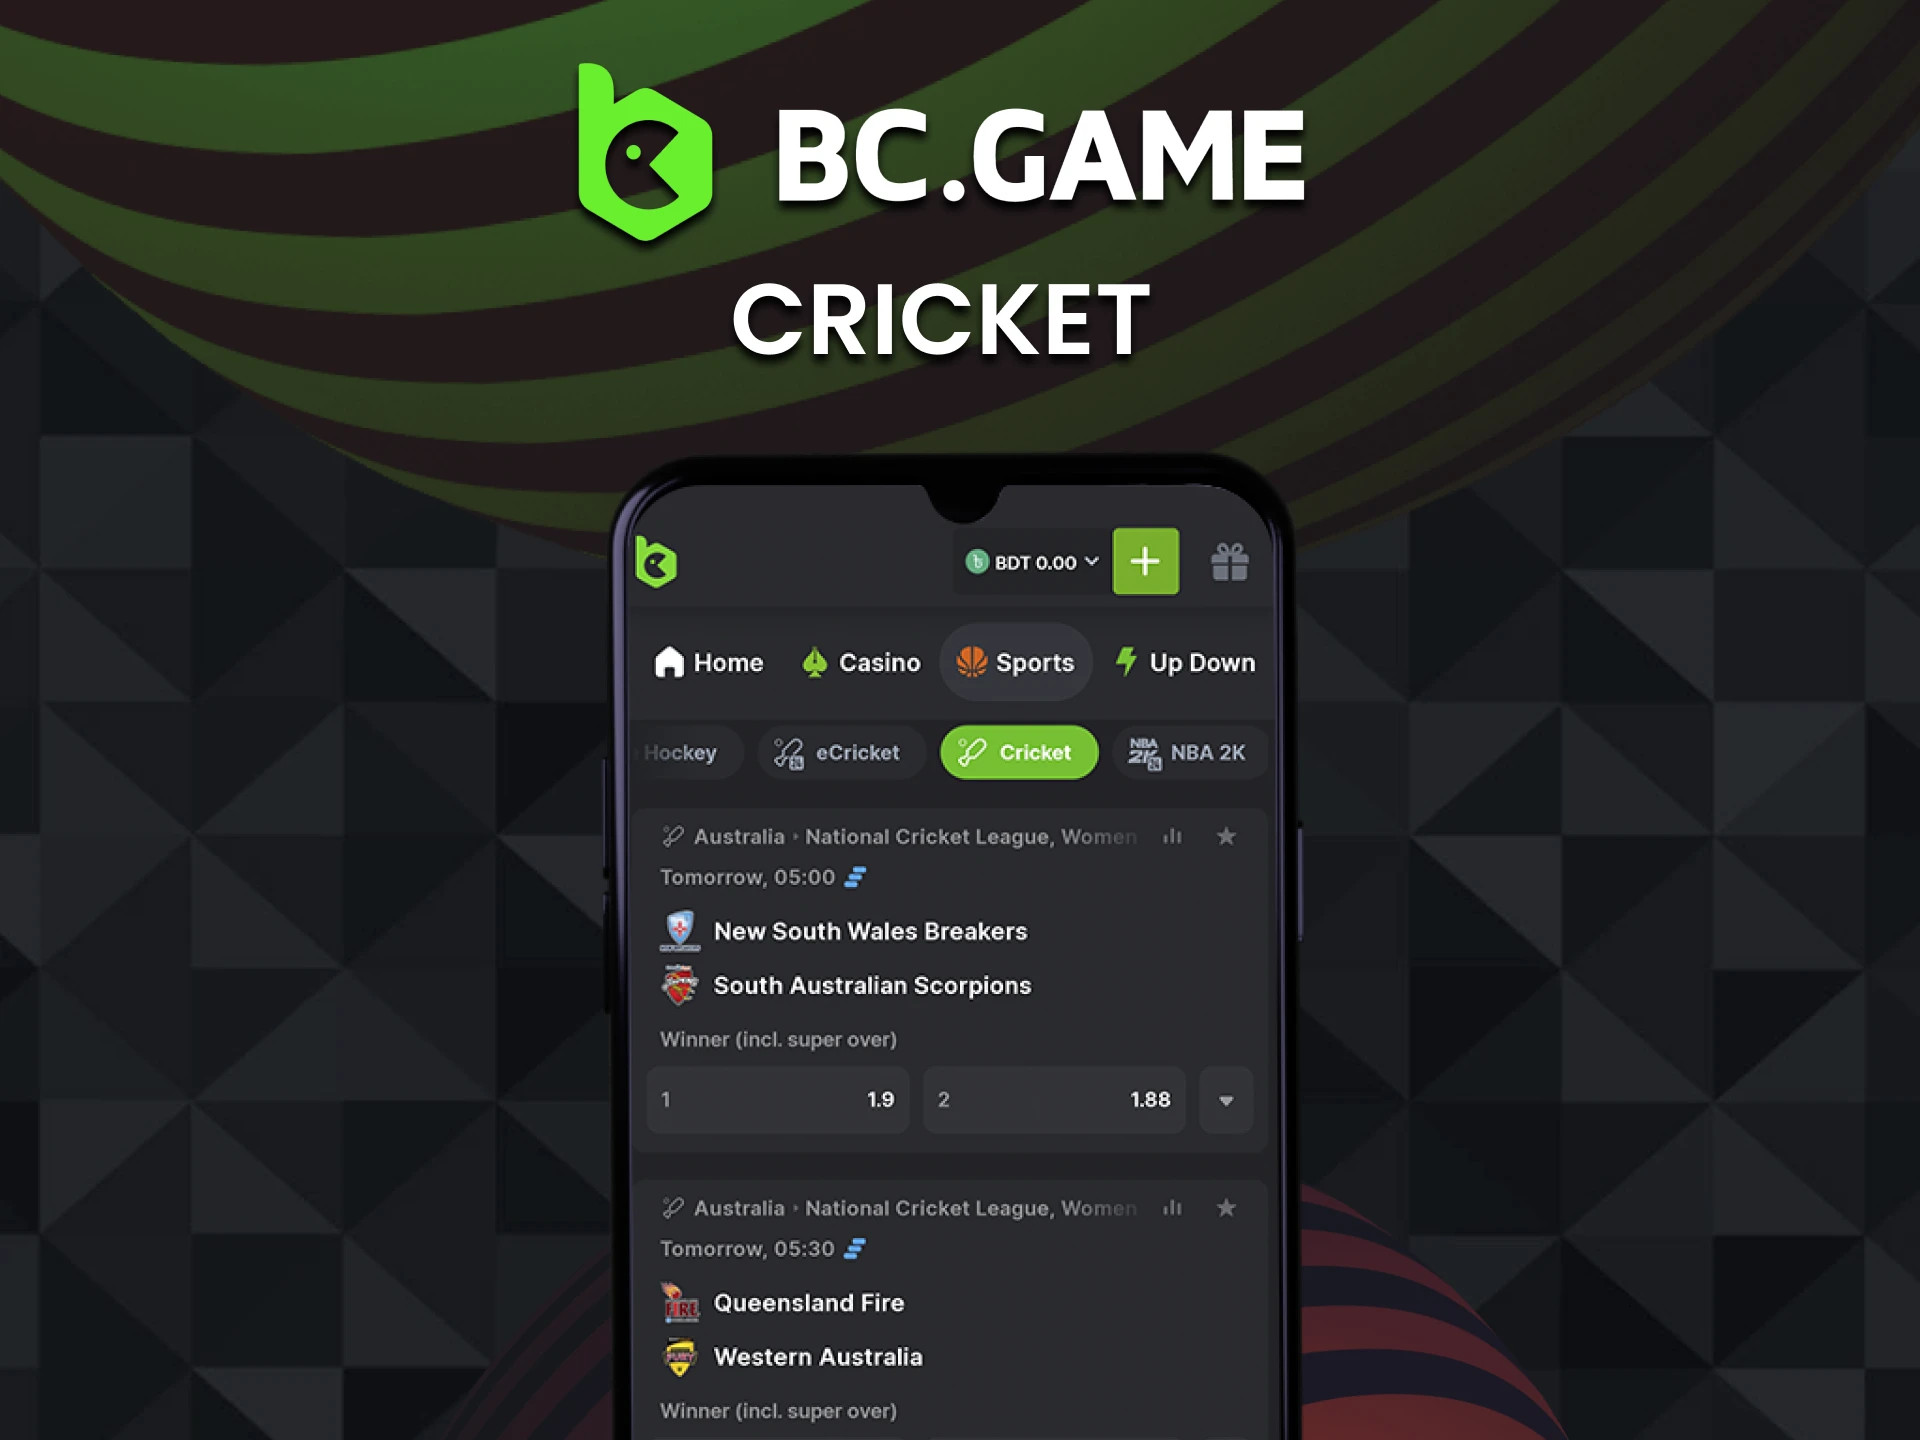 When betting in the BC Game app, choose cricket.